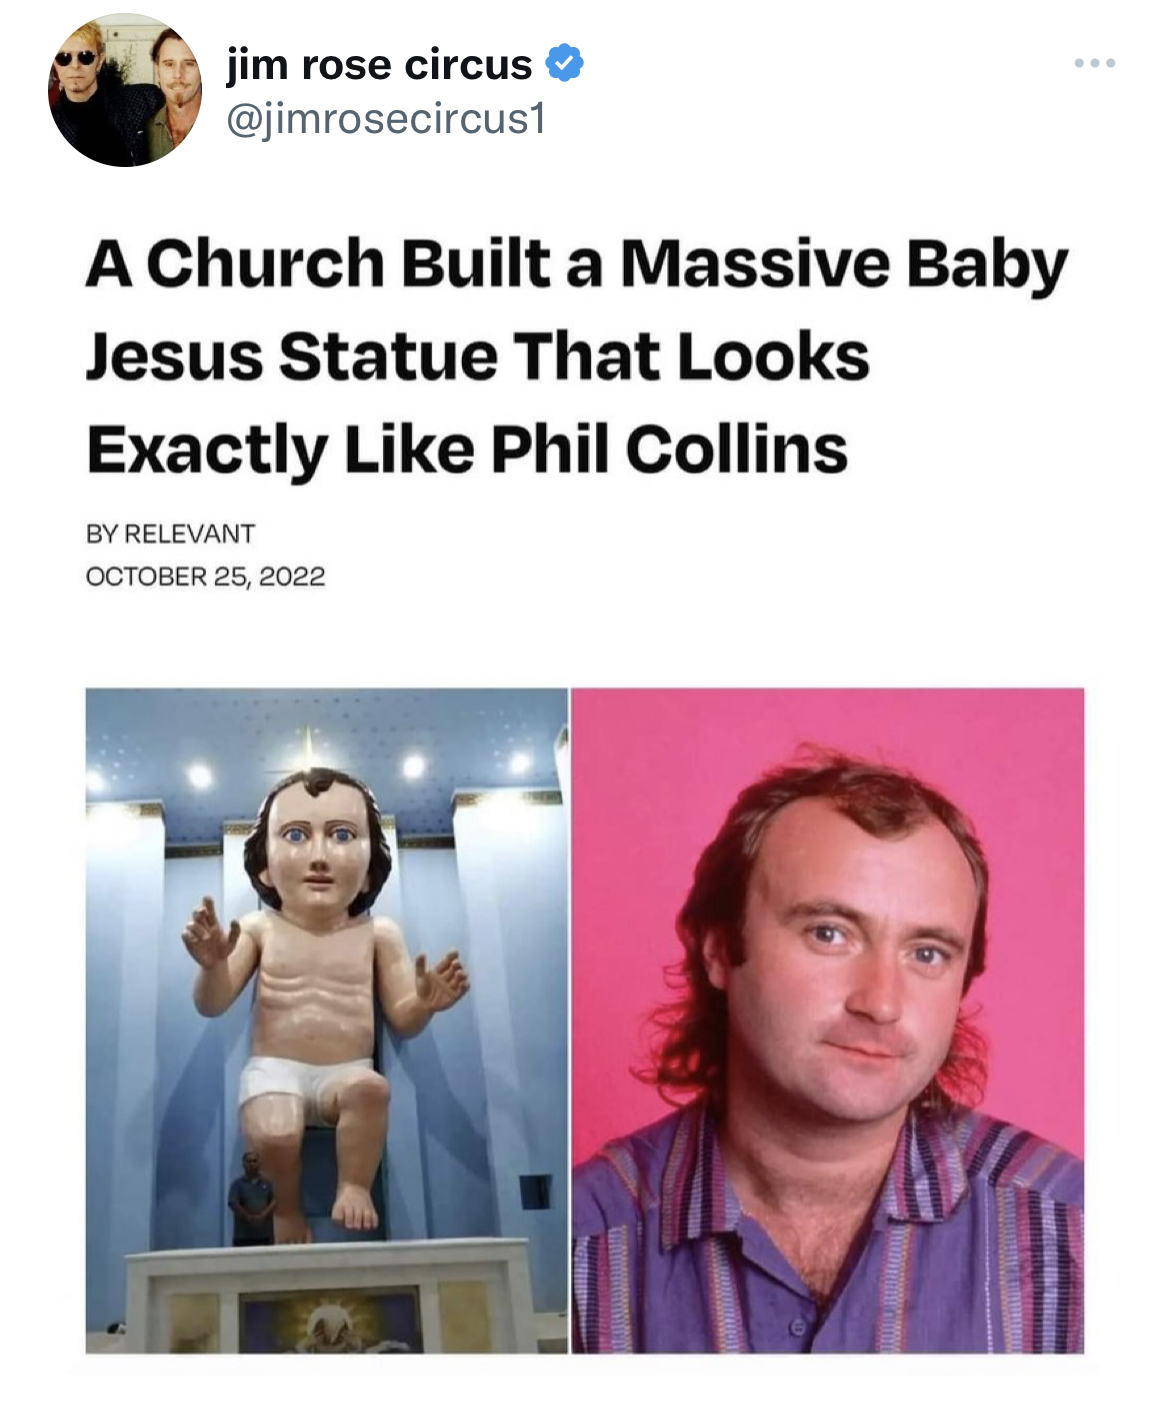 Celeb roasts of the week - kein durchgang schild - jim rose circus www A Church Built a Massive Baby Jesus Statue That Looks Exactly Phil Collins By Relevant